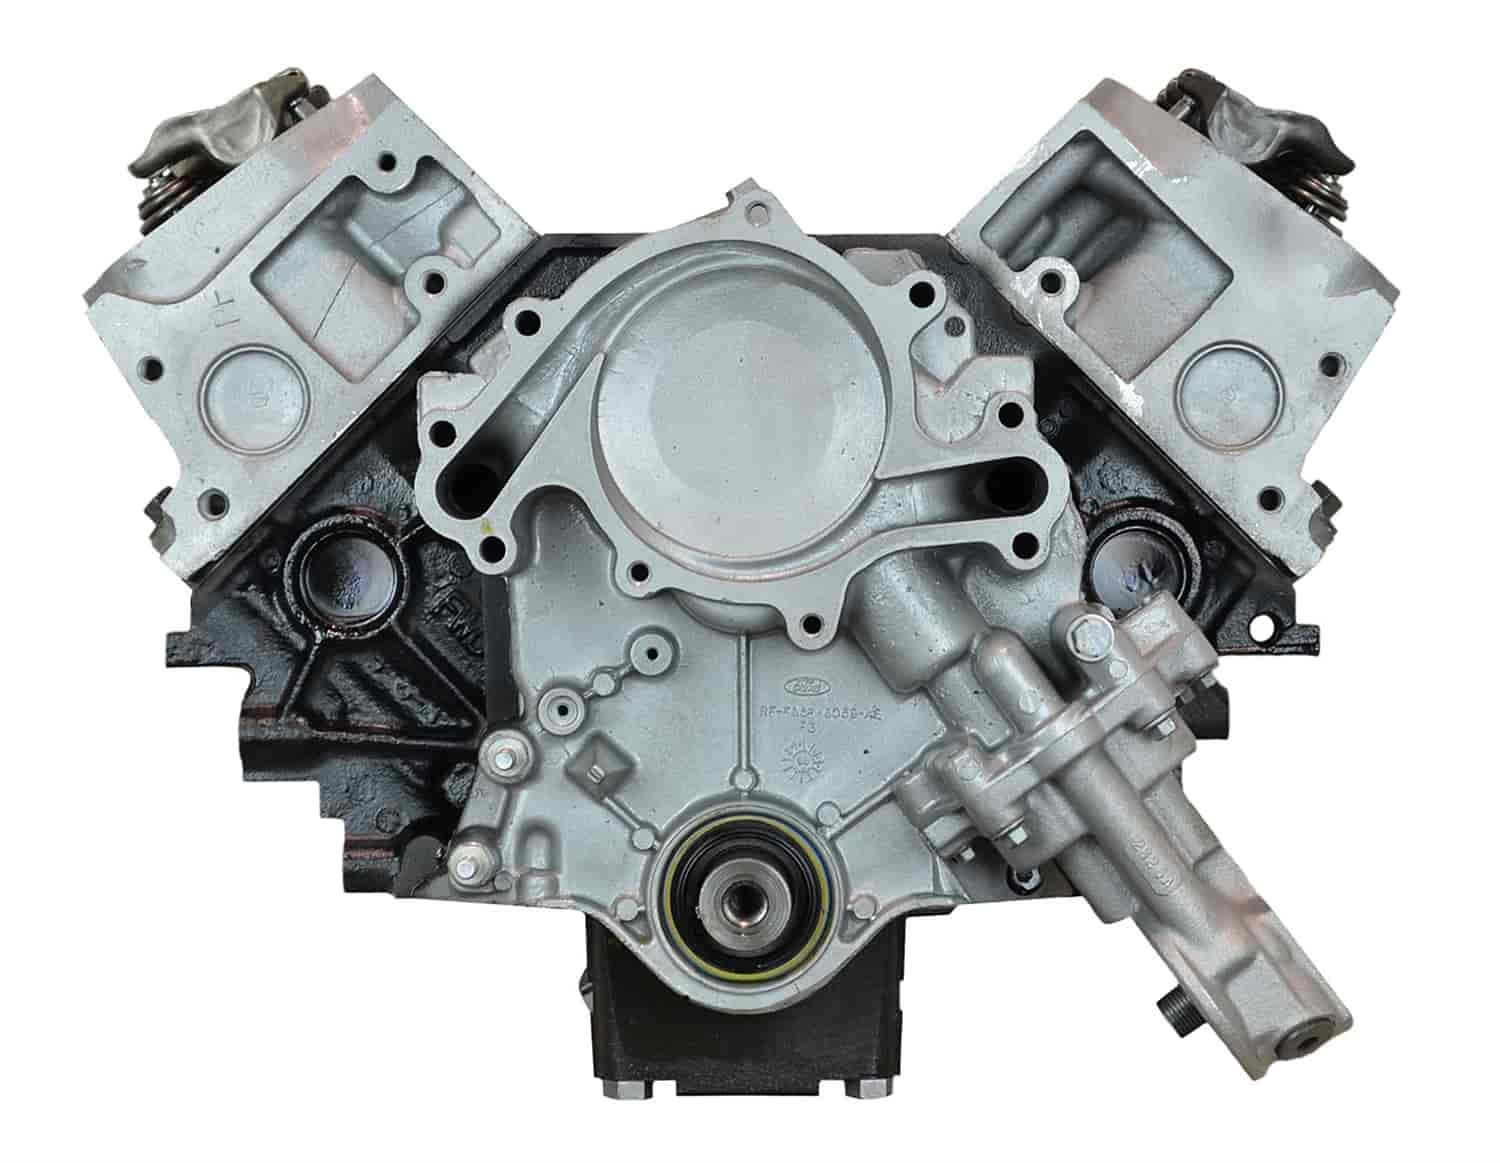 Remanufactured Crate Engine for 1999-2000 Ford Windstar with 3.8L V6